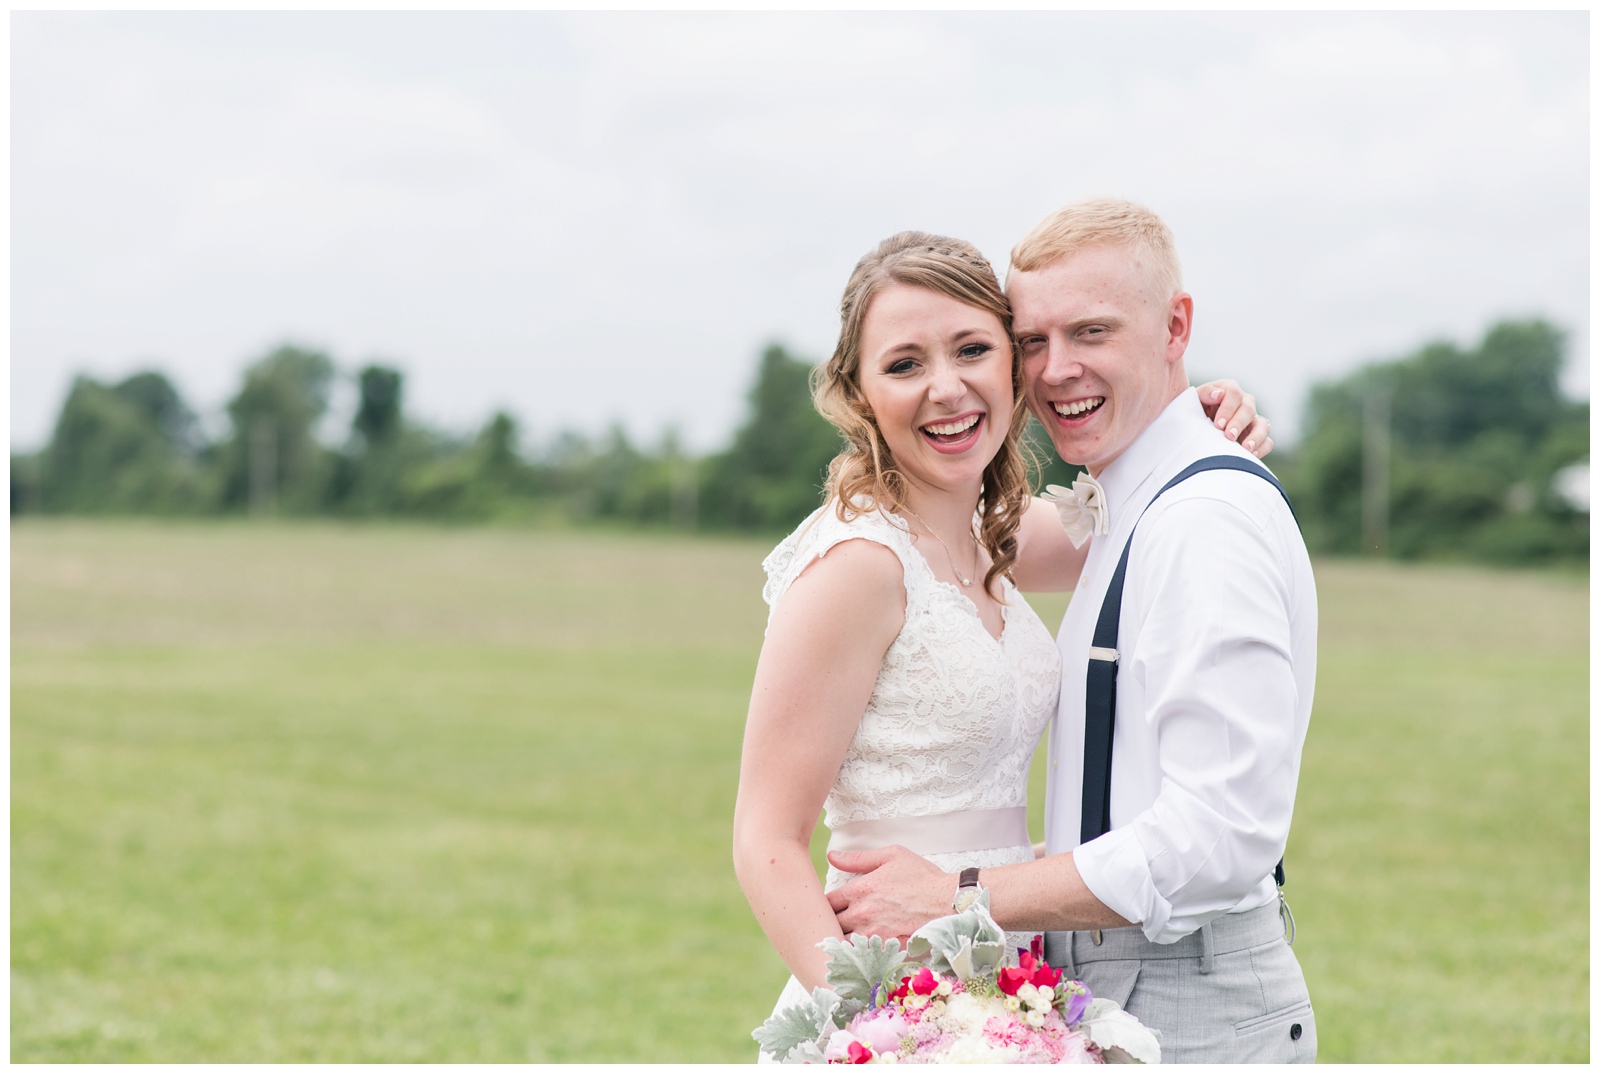 all occasions wedding at the barn Columbus Ohio Wedding Photographers Piper photography recapping May 2018 Weddings, June 2018 weddings and July 2018 weddings on the best wedding blog